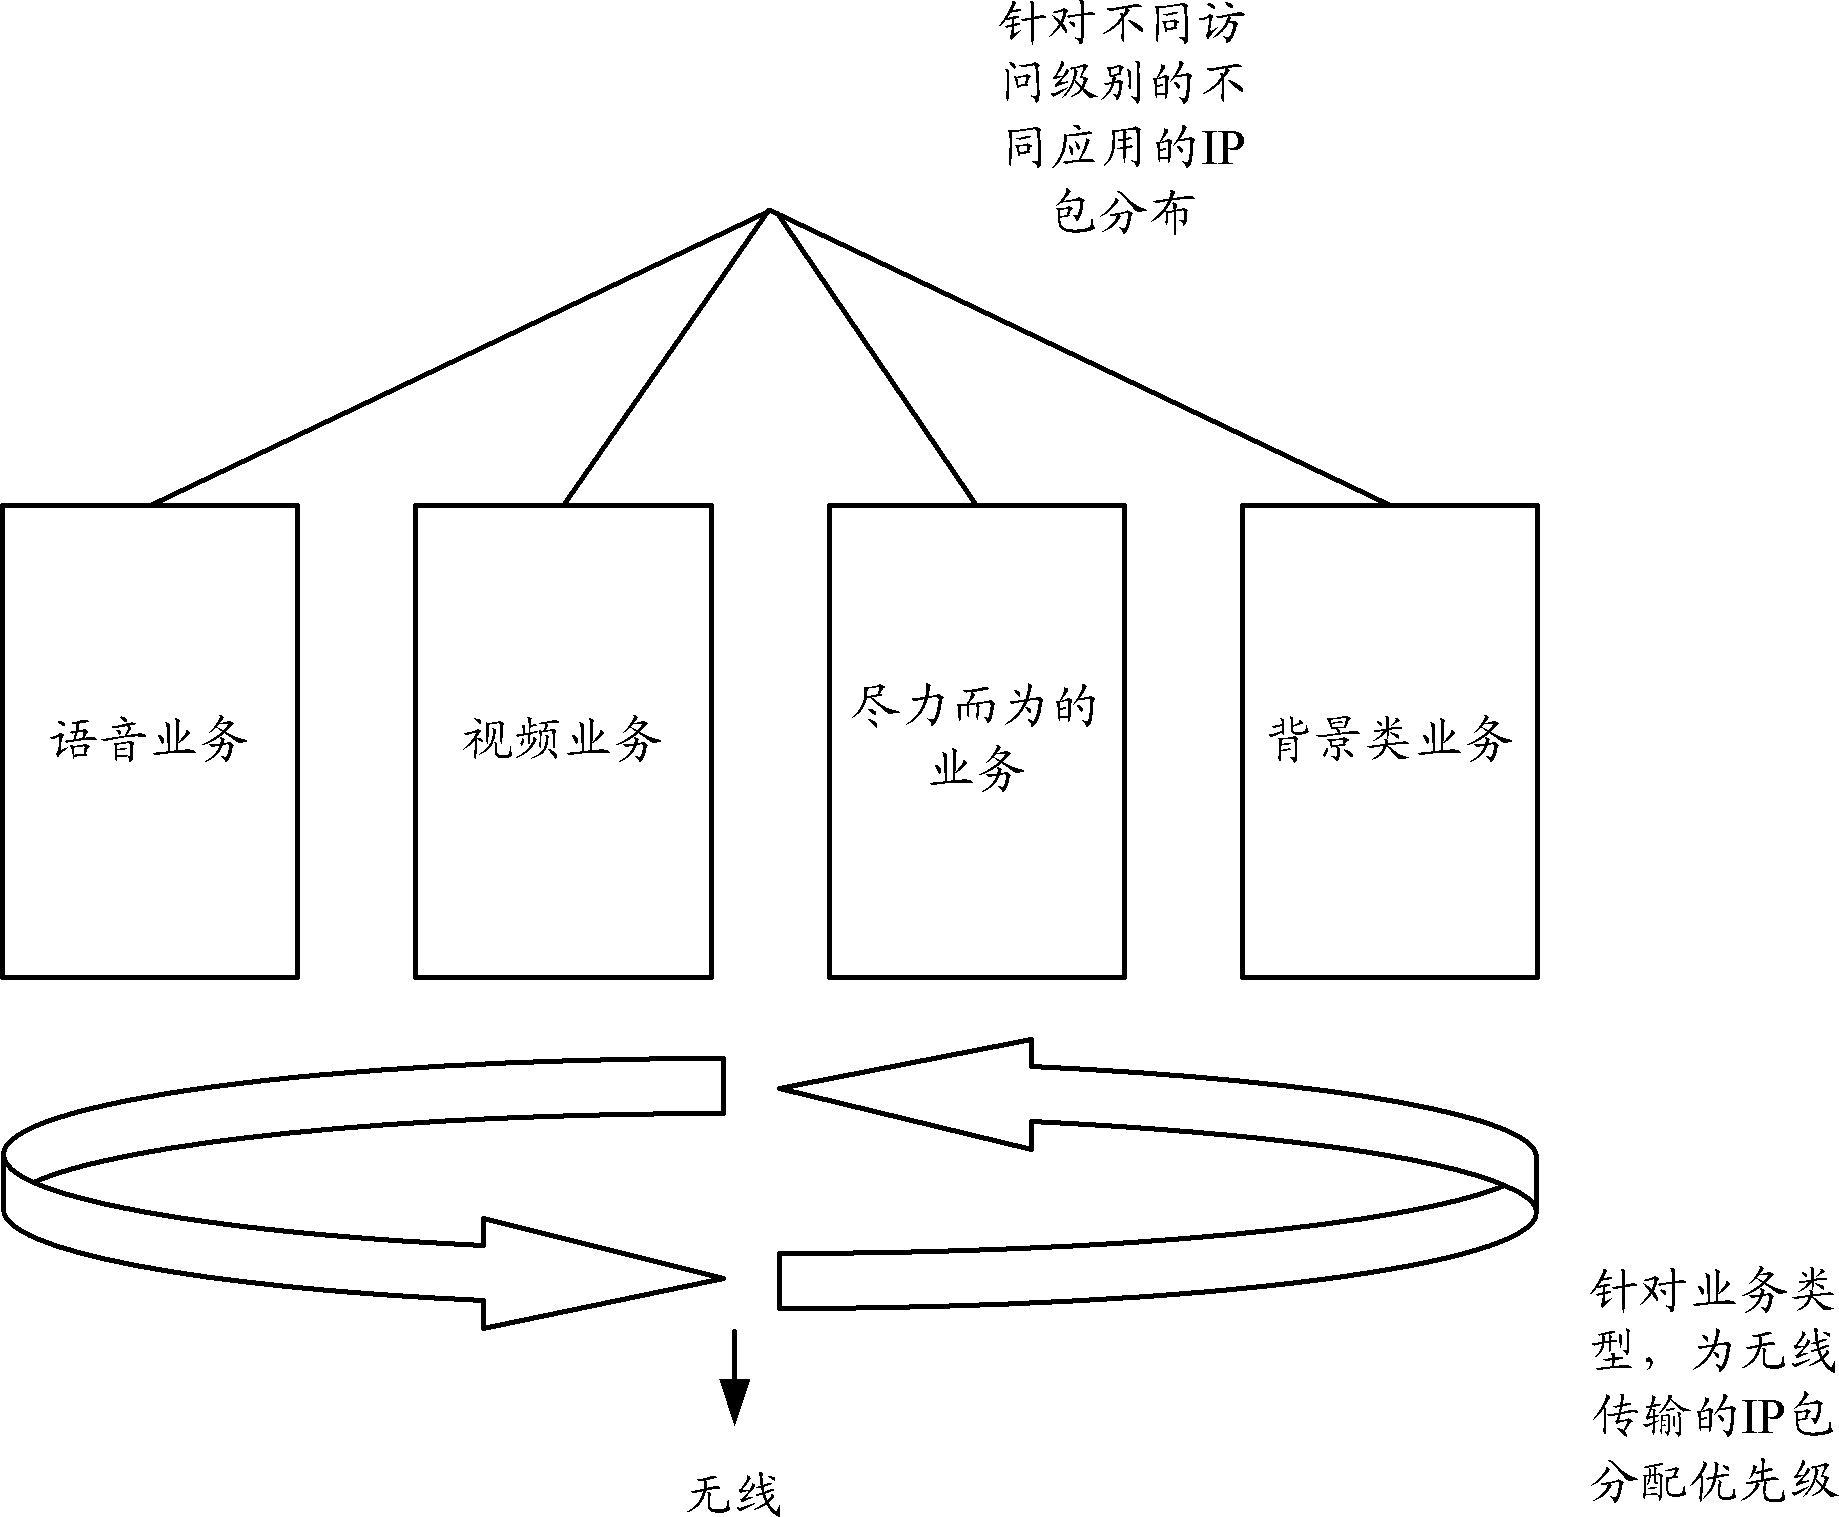 Method and device for managing and controlling charging and quality of service (QoS) strategies